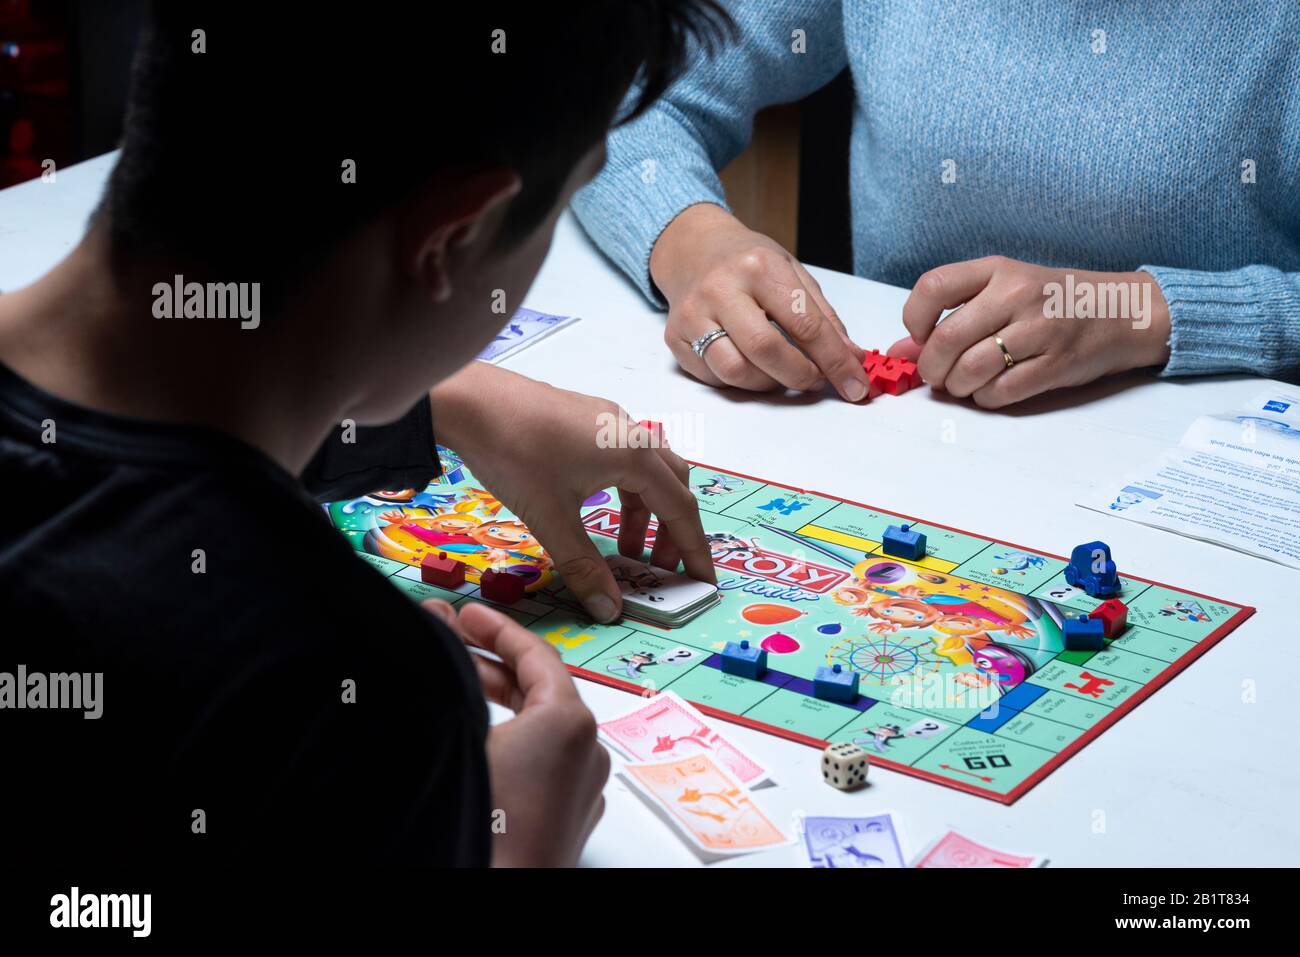 Teenagers playing monopoly board game together Stock Photo